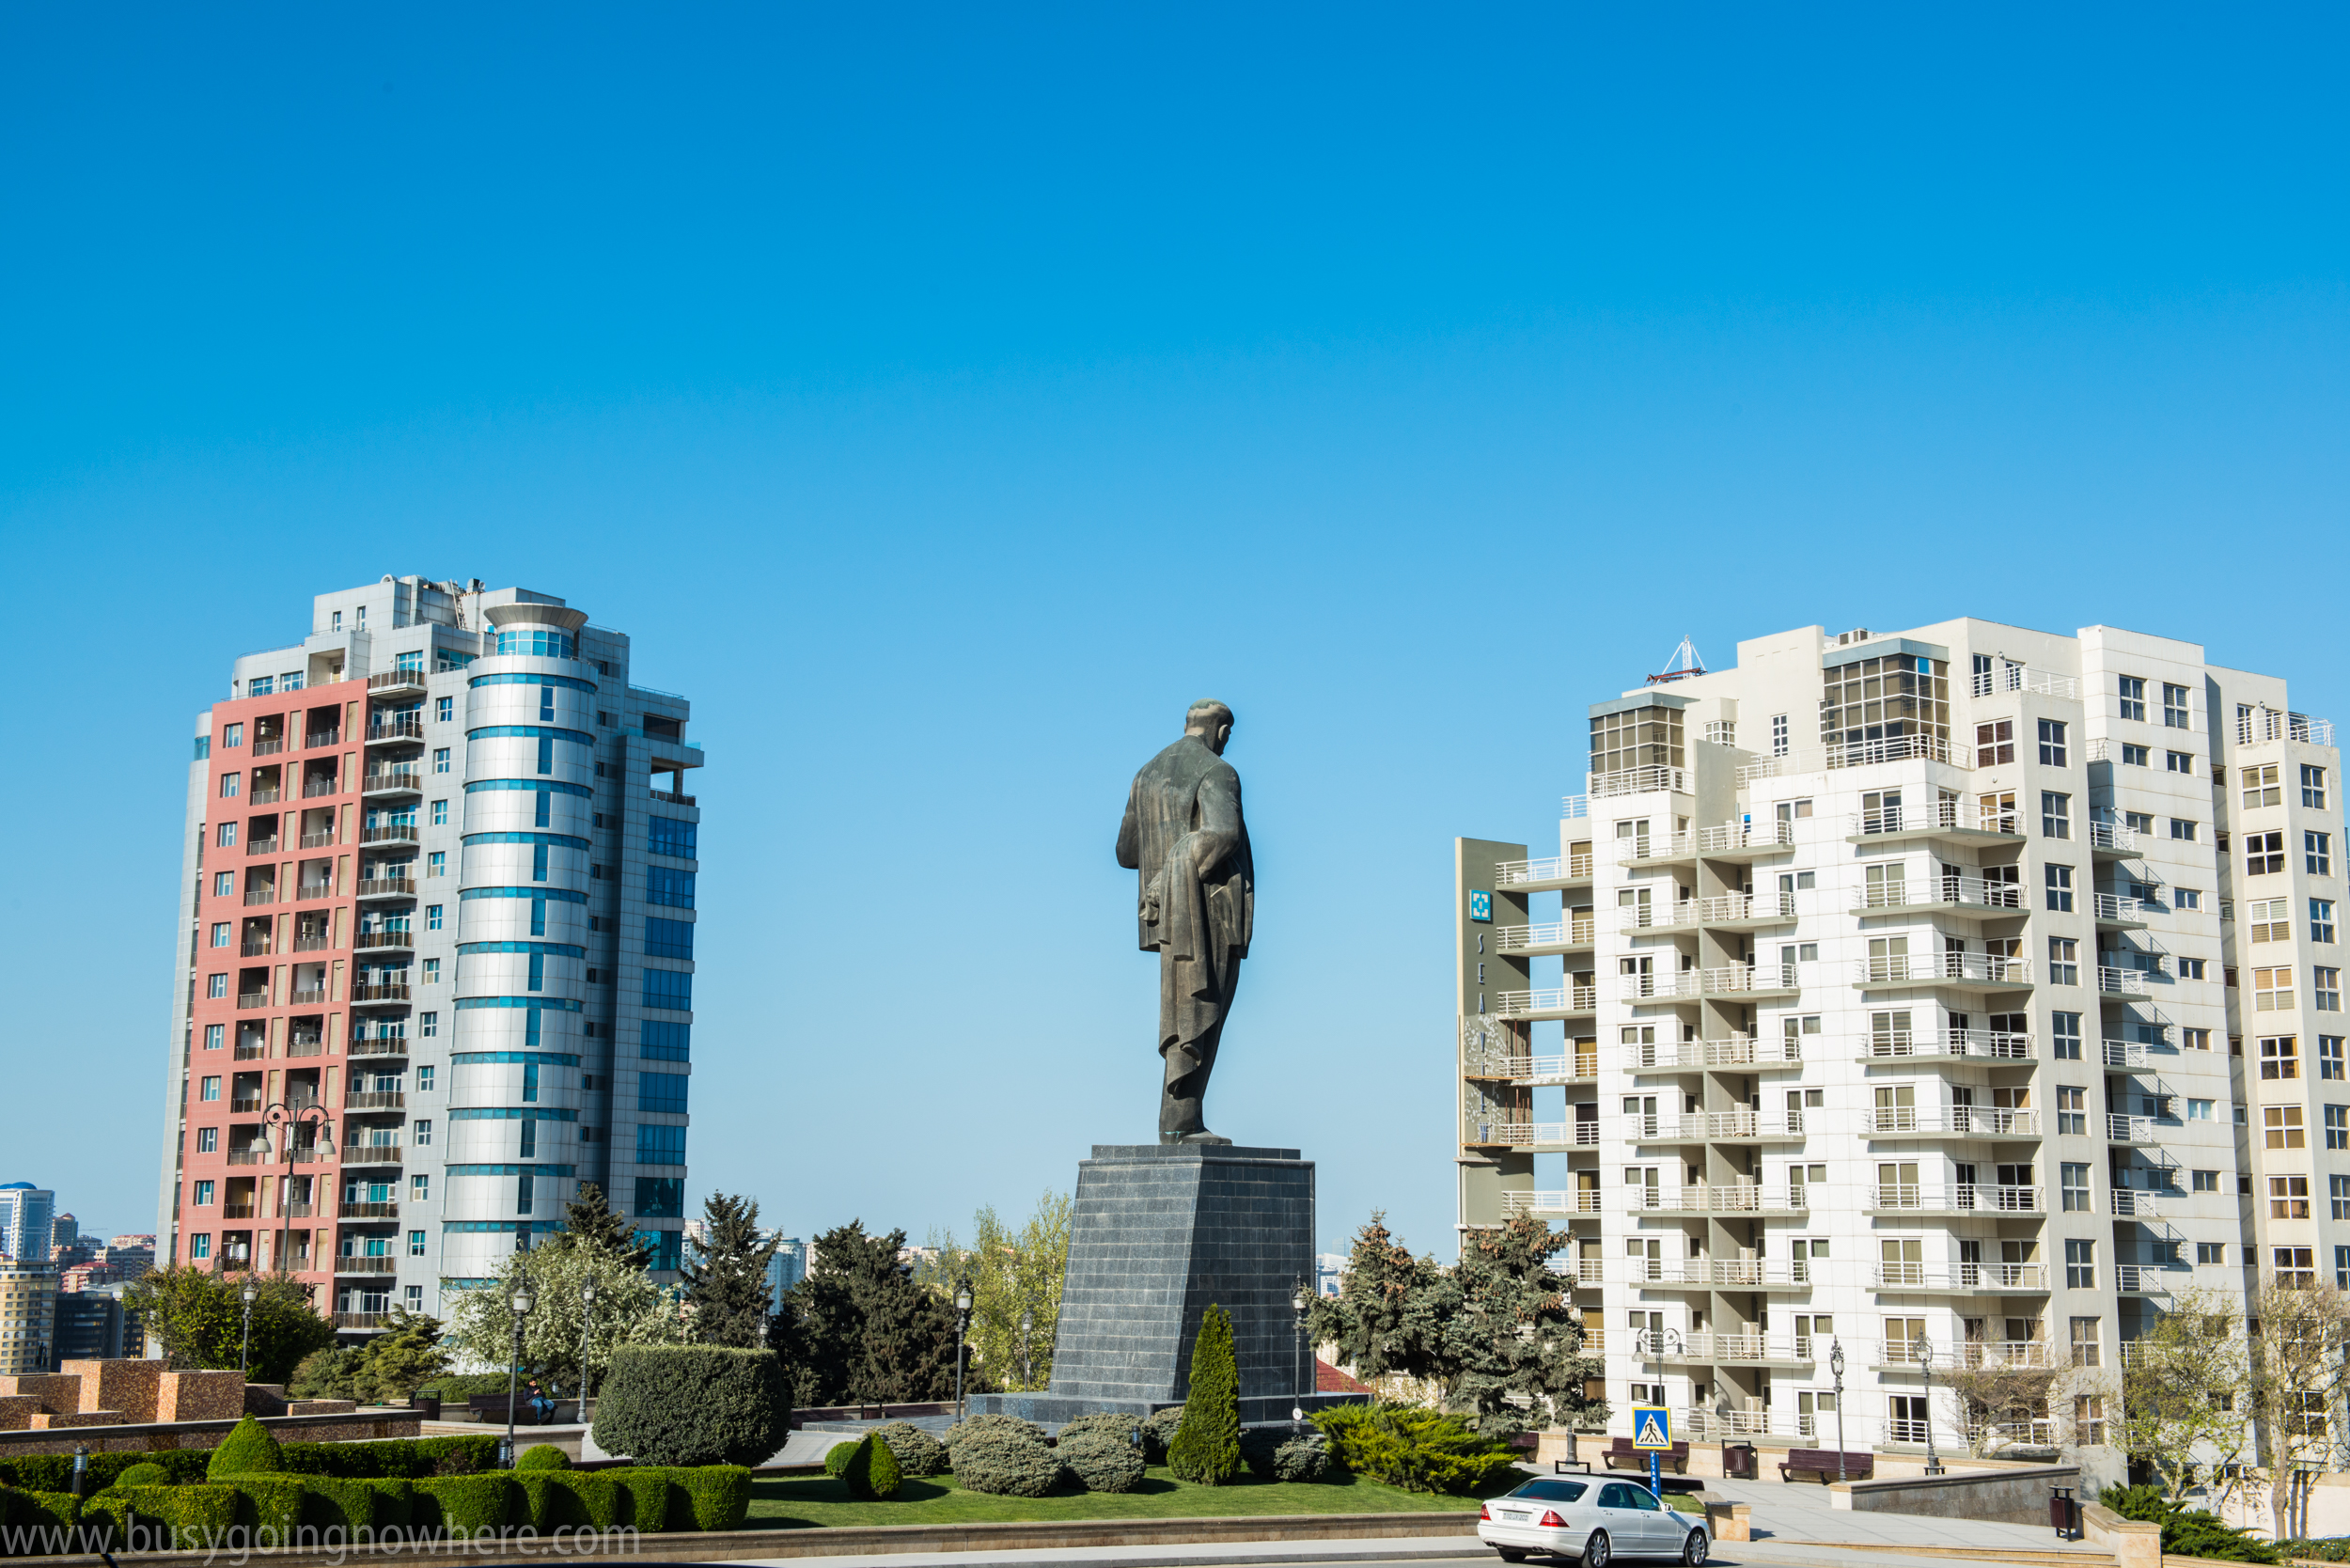 Larger than life statues in Baku. Here the statue of Nariman Narimanov